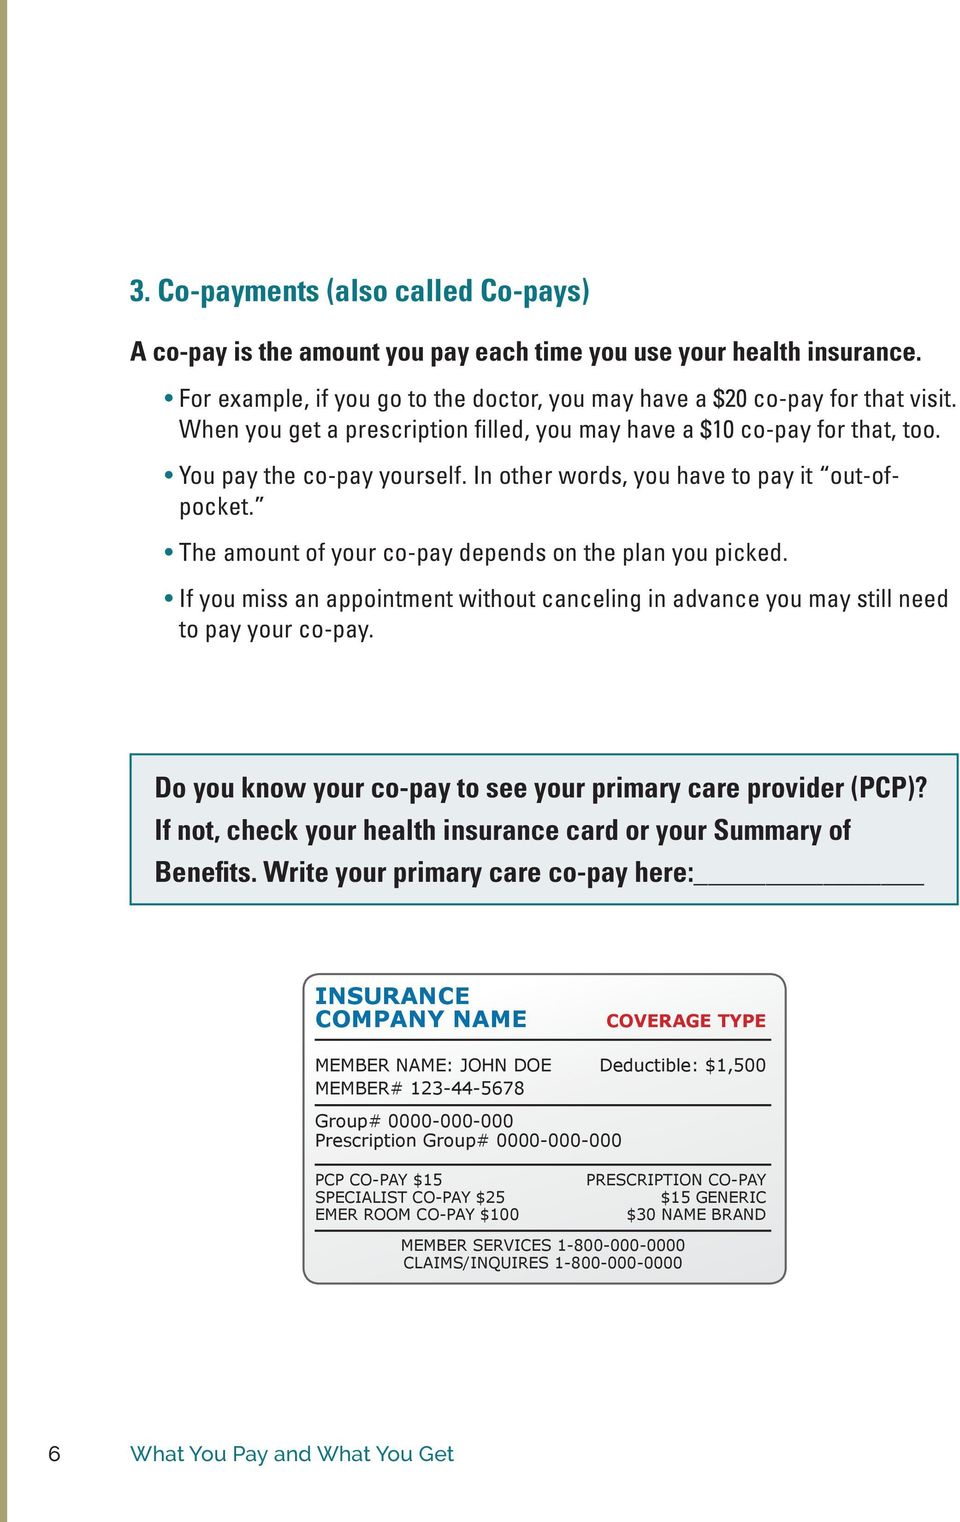 The amount of your co-pay depends on the plan you picked. If you miss an appointment without canceling in advance you may still need to pay your co-pay.